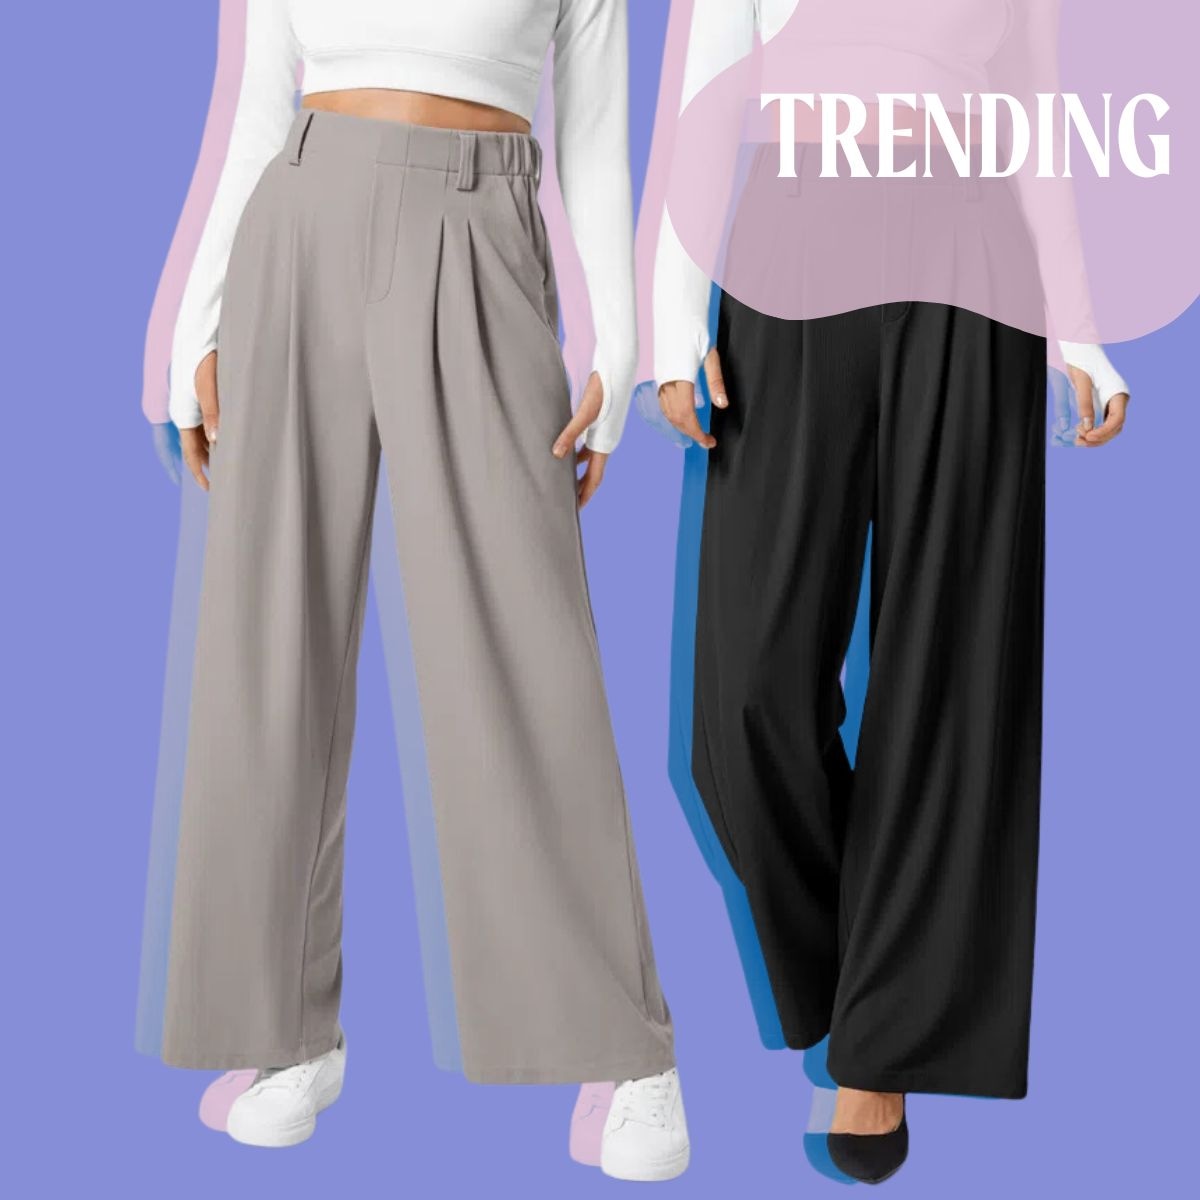 TikTok's Favorite Work Pants From Halara Are 40% off Right Now